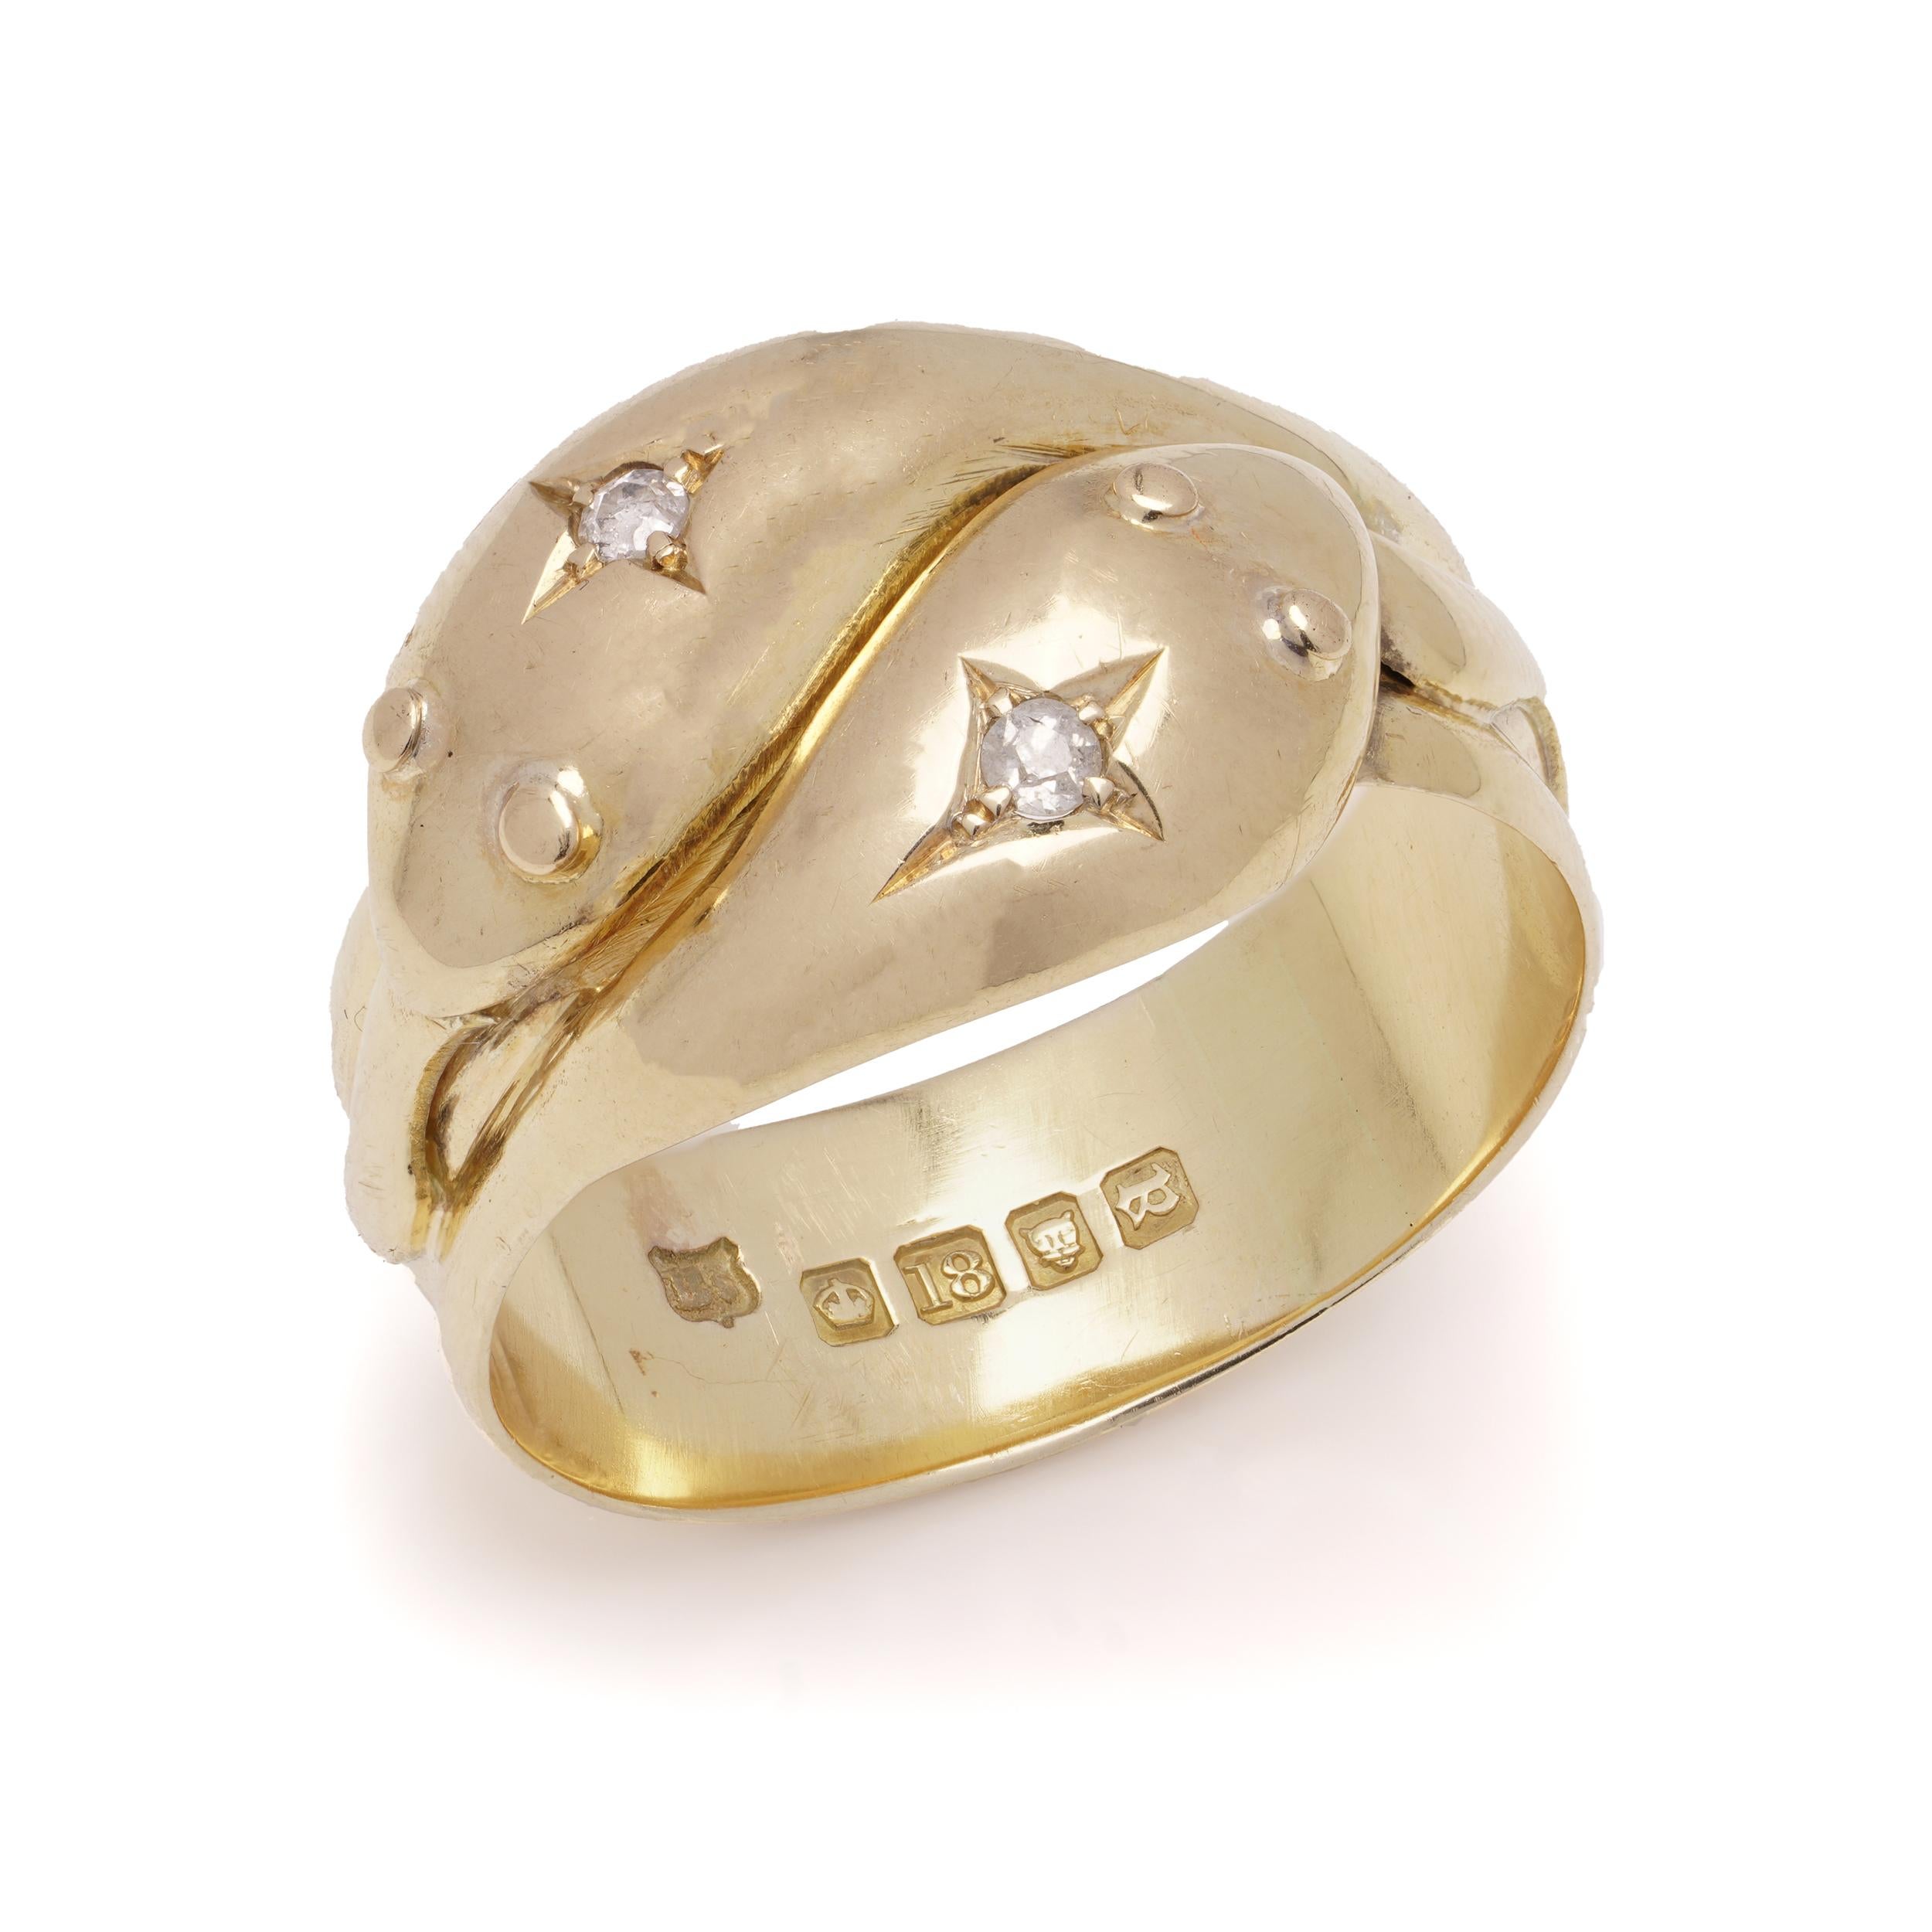 Antique 18kt yellow gold men's band ring in the shape of a pair of coiled snakes, featuring their tongues sticking out. The tops of their heads are set with two old-cut diamonds.
Made in the United Kingdom, London, 1916
Hallmarked with London town